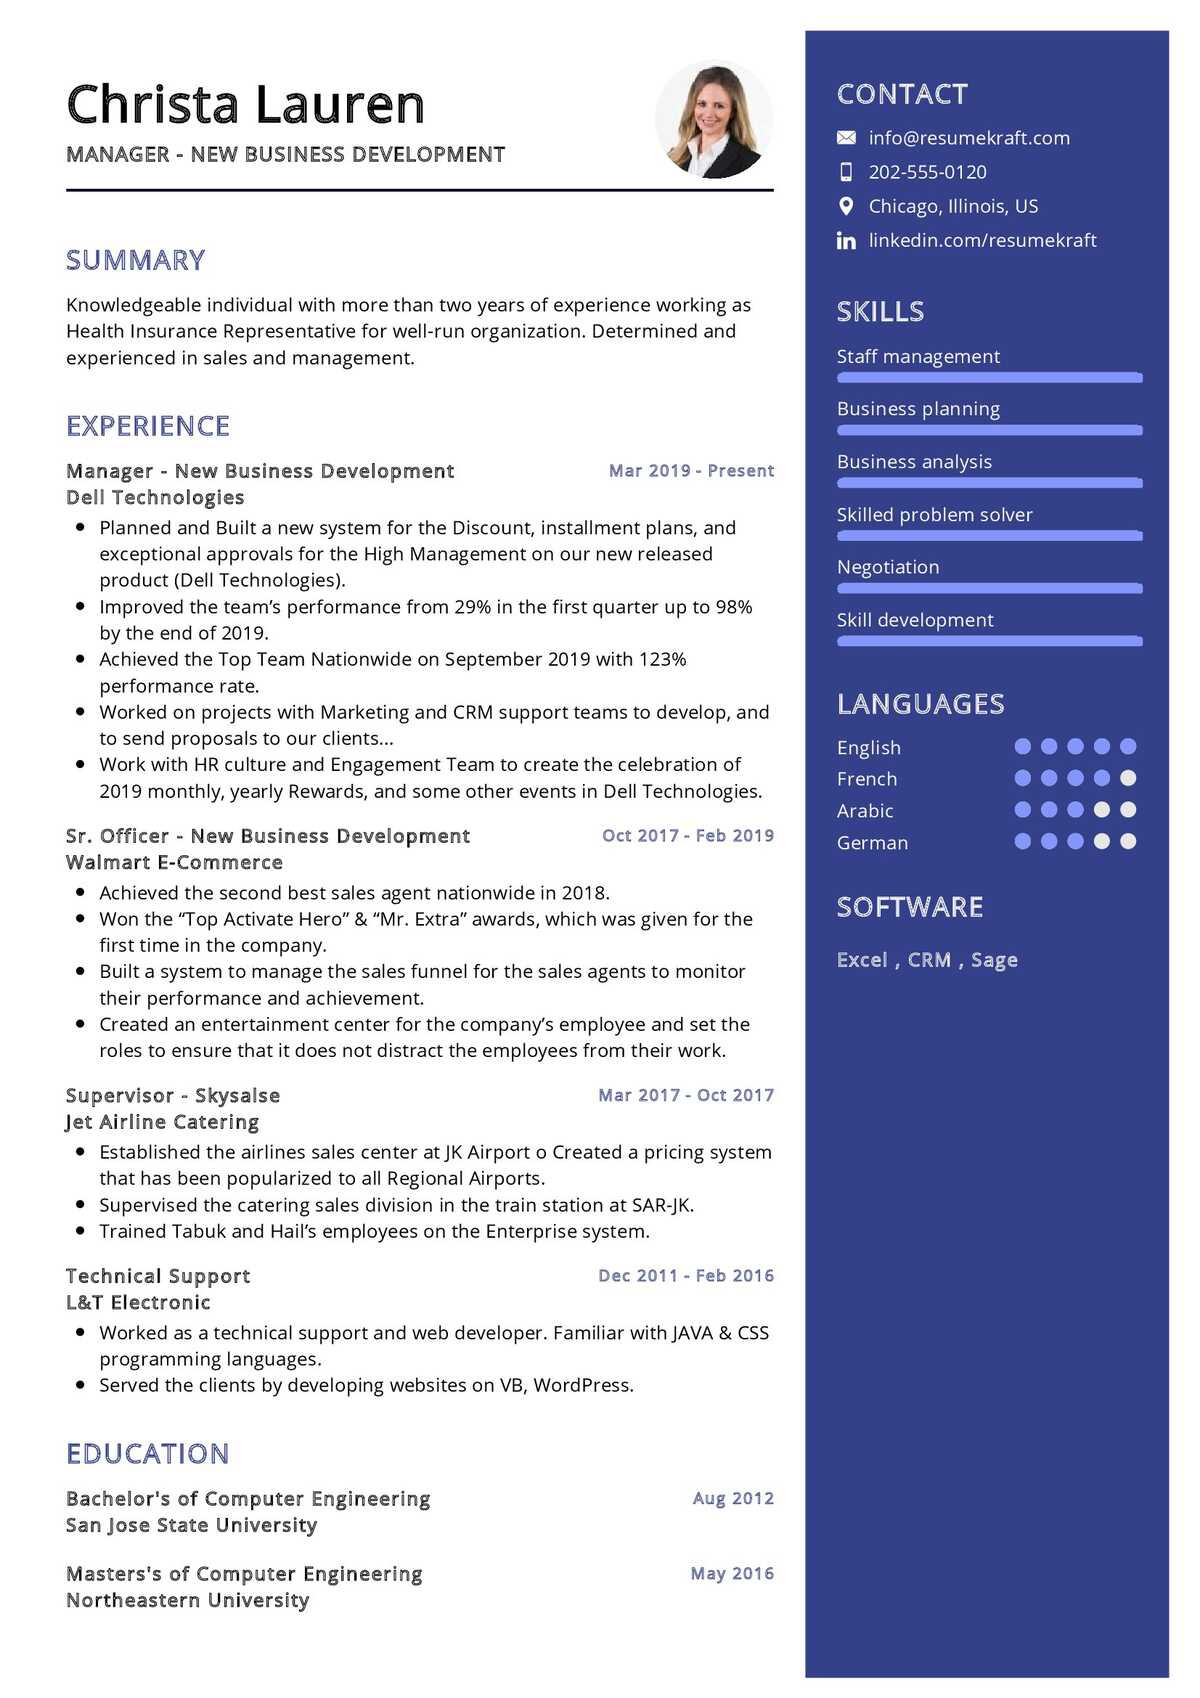 Sample Resume for Experienced Business Development Manager New Business Development Manager Resume 2022 Writing Tips …